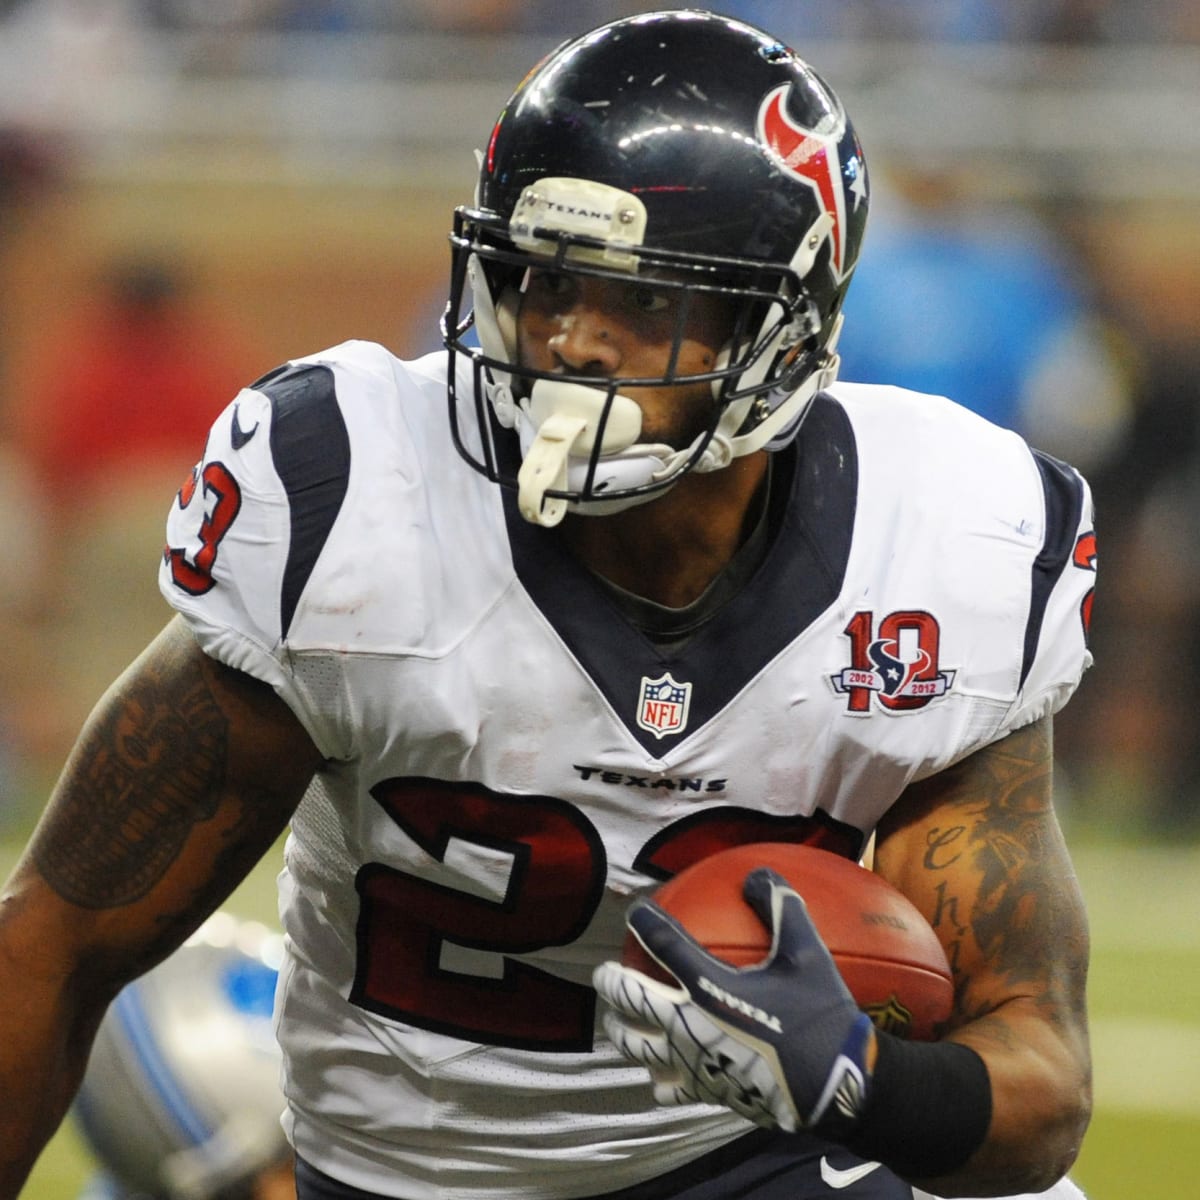 NFL Scores Week 10, Texans Vs. Buccaneers: Arian Foster Leads Rout